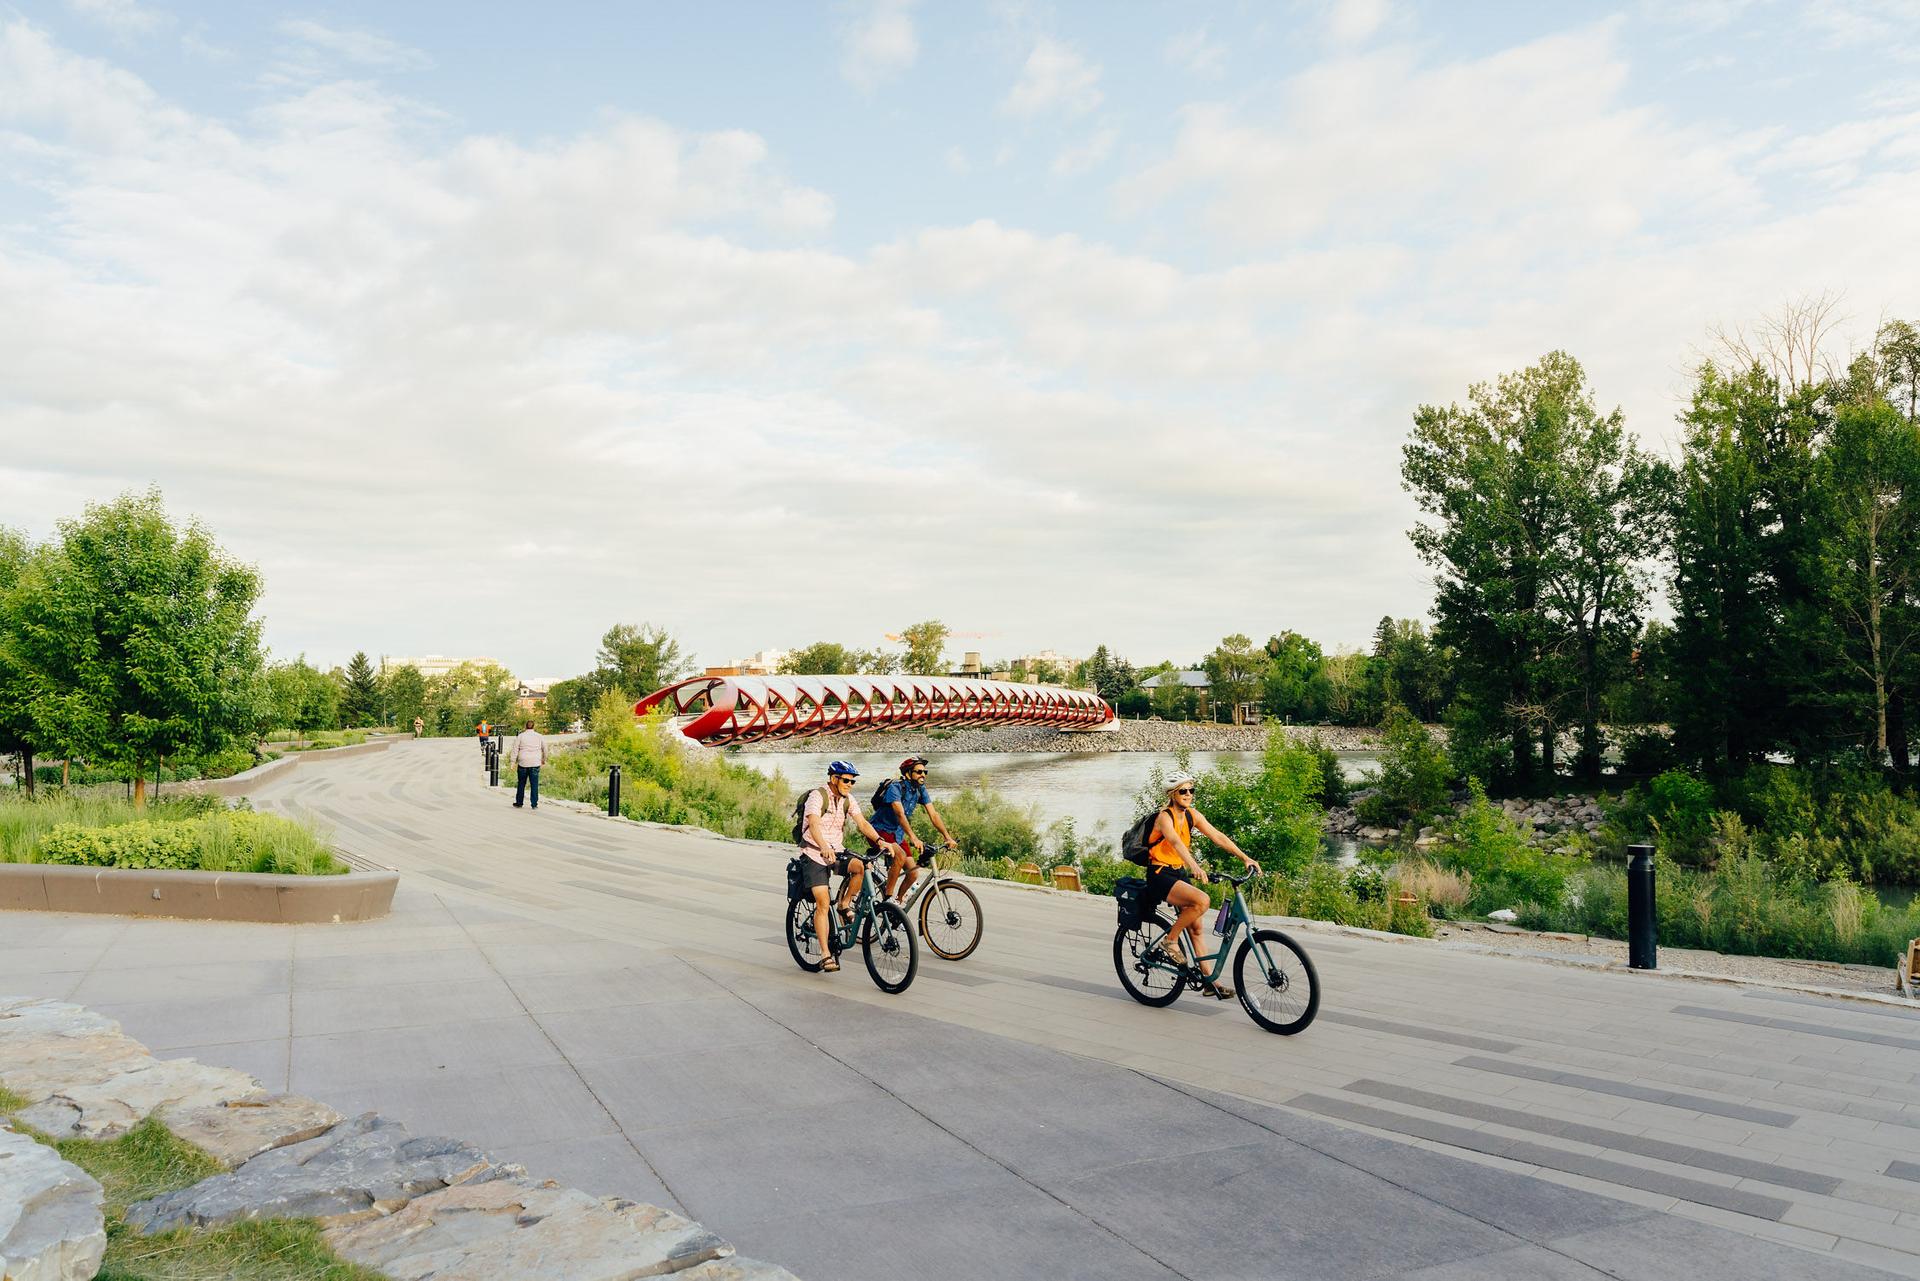 Calgary is home to the most extensive urban biking and pathway system in North America. 